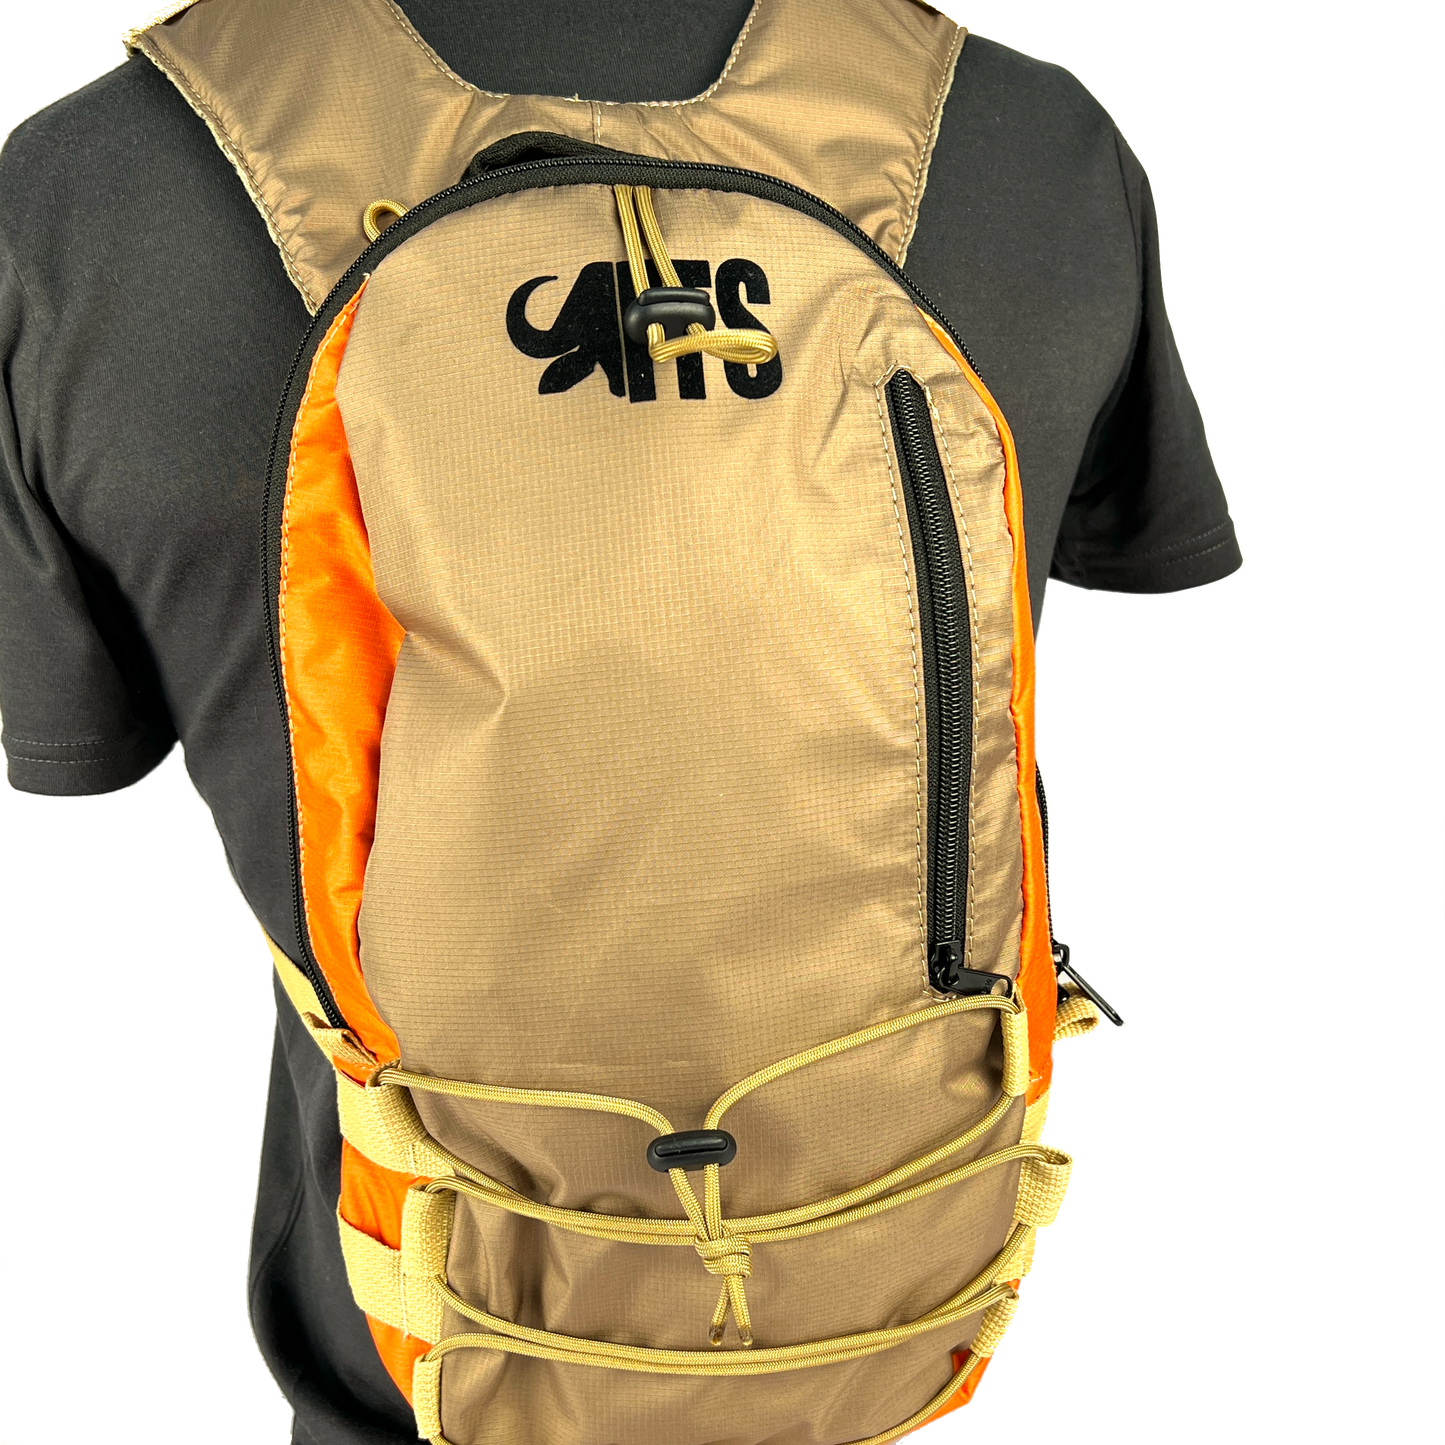 Chest gear bag for fishing and hunting with hydration bag